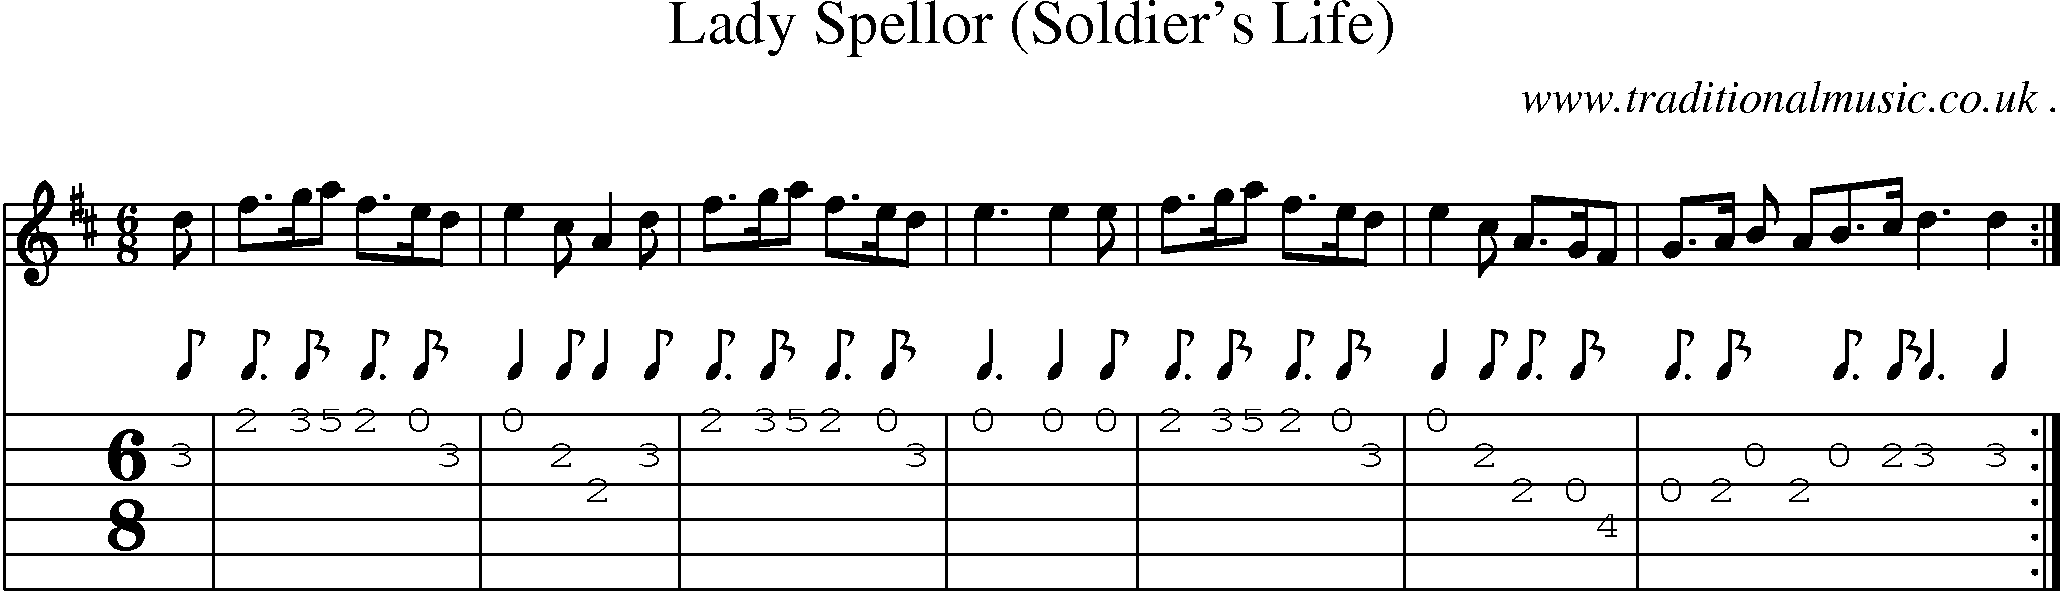 Sheet-Music and Guitar Tabs for Lady Spellor (soldiers Life)